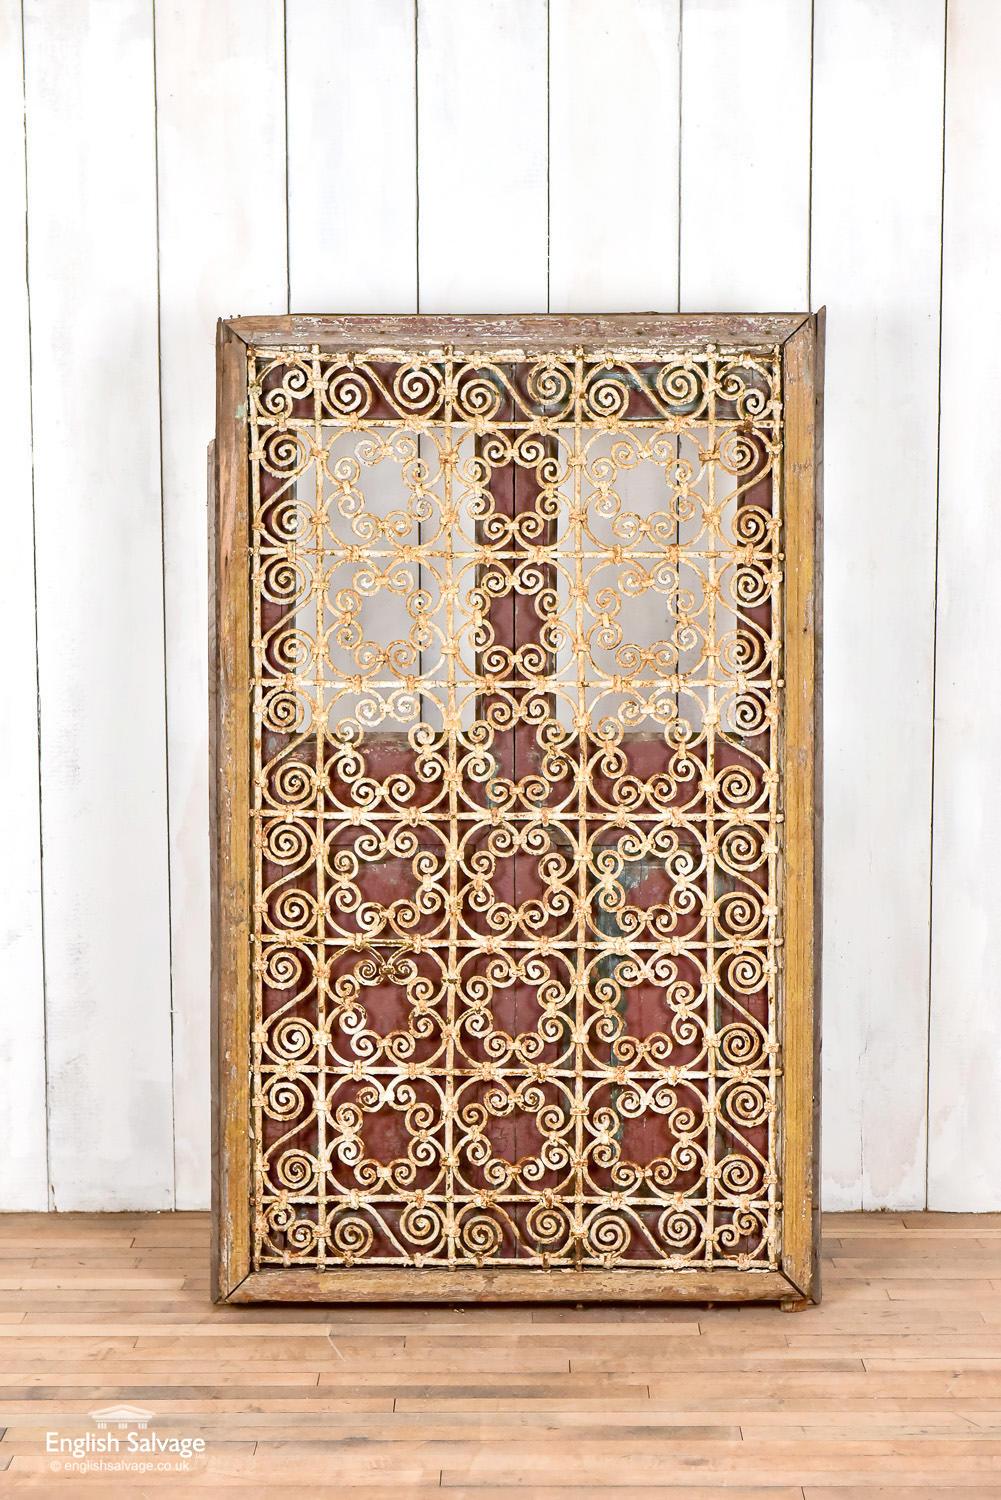 Moroccan shutters and ornate iron window grill in frame. The deep red paint is weathered and peeling to reveal old layers of paint, giving an appealing patina. Overall dimensions of the frame are given below, and the doors measure 88cm wide x